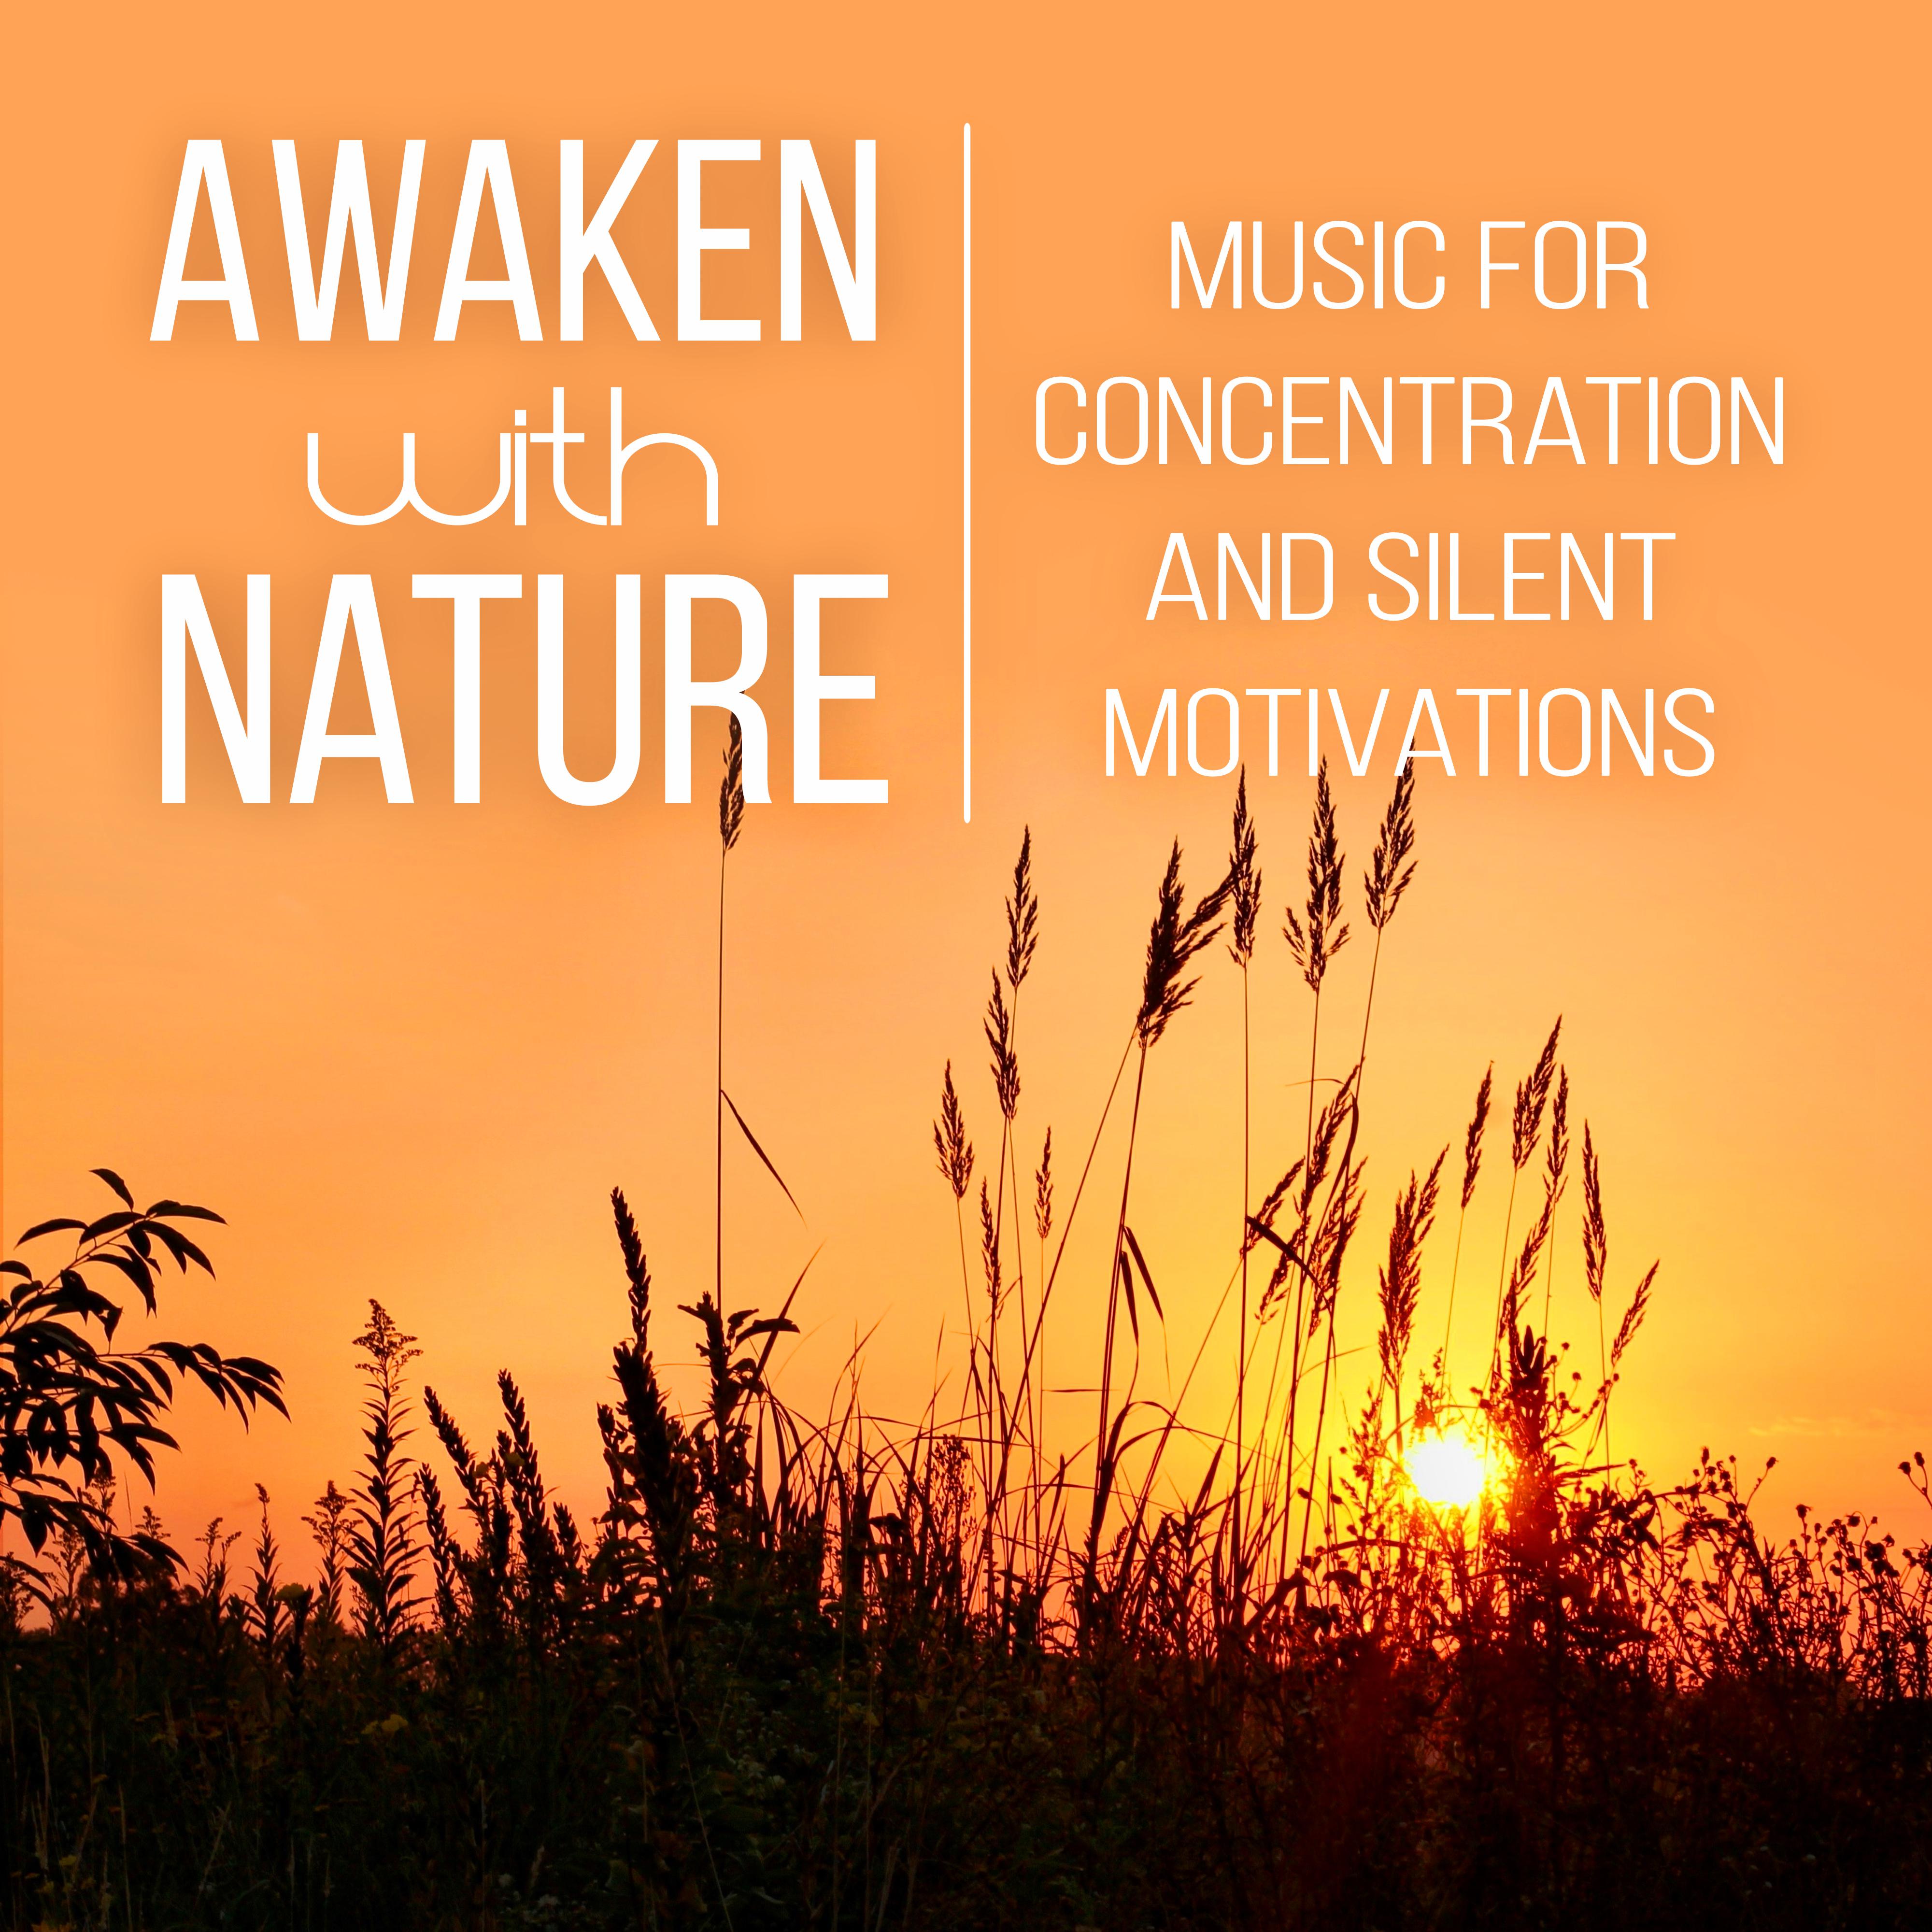 Awaken with Nature - Music for Concentration and Silent Motivations, Lights of Mind, Hypnosis, Study Music, Meditation Relaxation, Yoga, Positive Thinking, Sleep